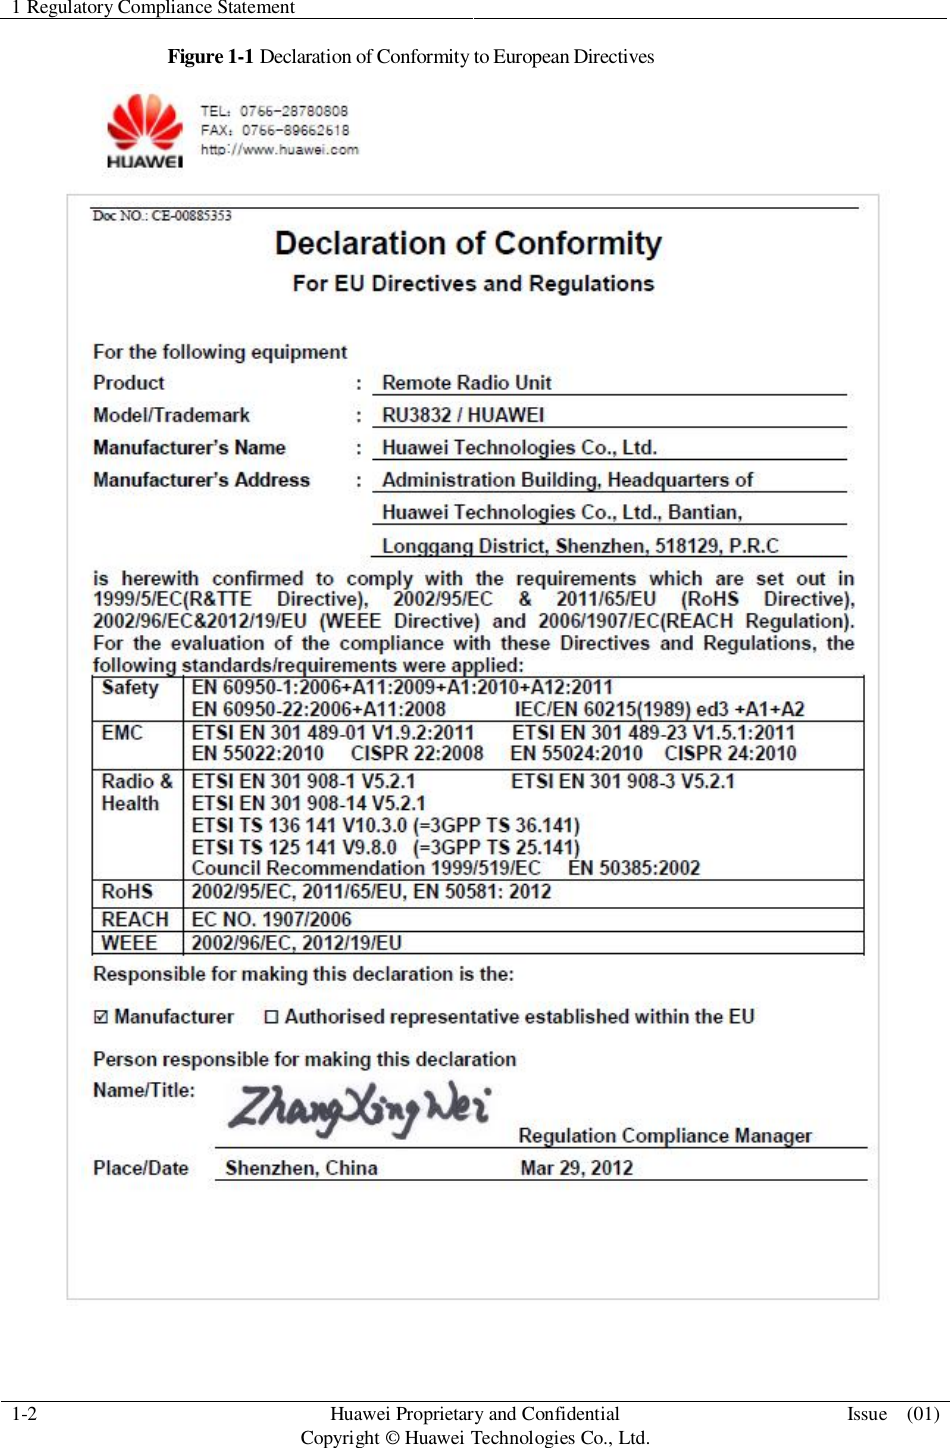 1 Regulatory Compliance Statement1-2 HuaweiProprietary and ConfidentialCopyright © Huawei Technologies Co., Ltd. Issue  (01)Figure 1-1 Declaration of Conformity to European Directives